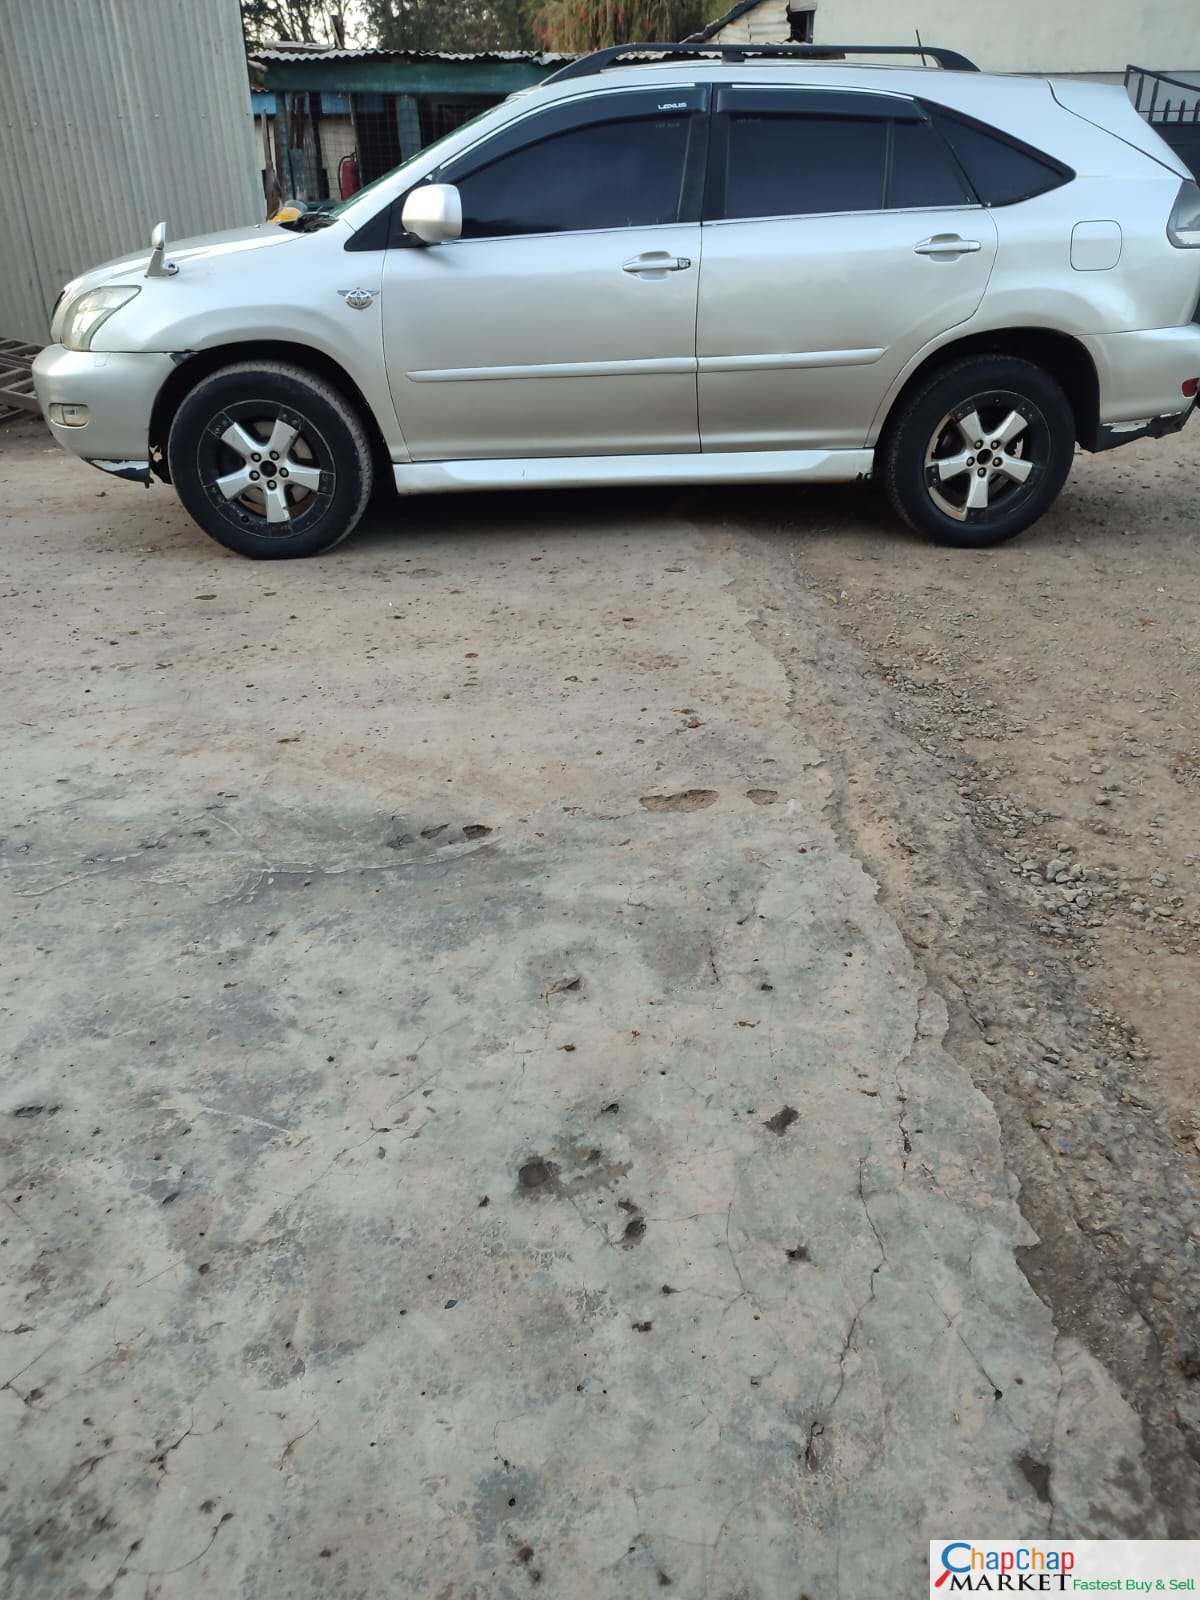 Toyota Harrier kenya 620K ONLY You Pay 30% Deposit Trade in OK harrier for sale in kenya hire purchase installments EXCLUSIVE